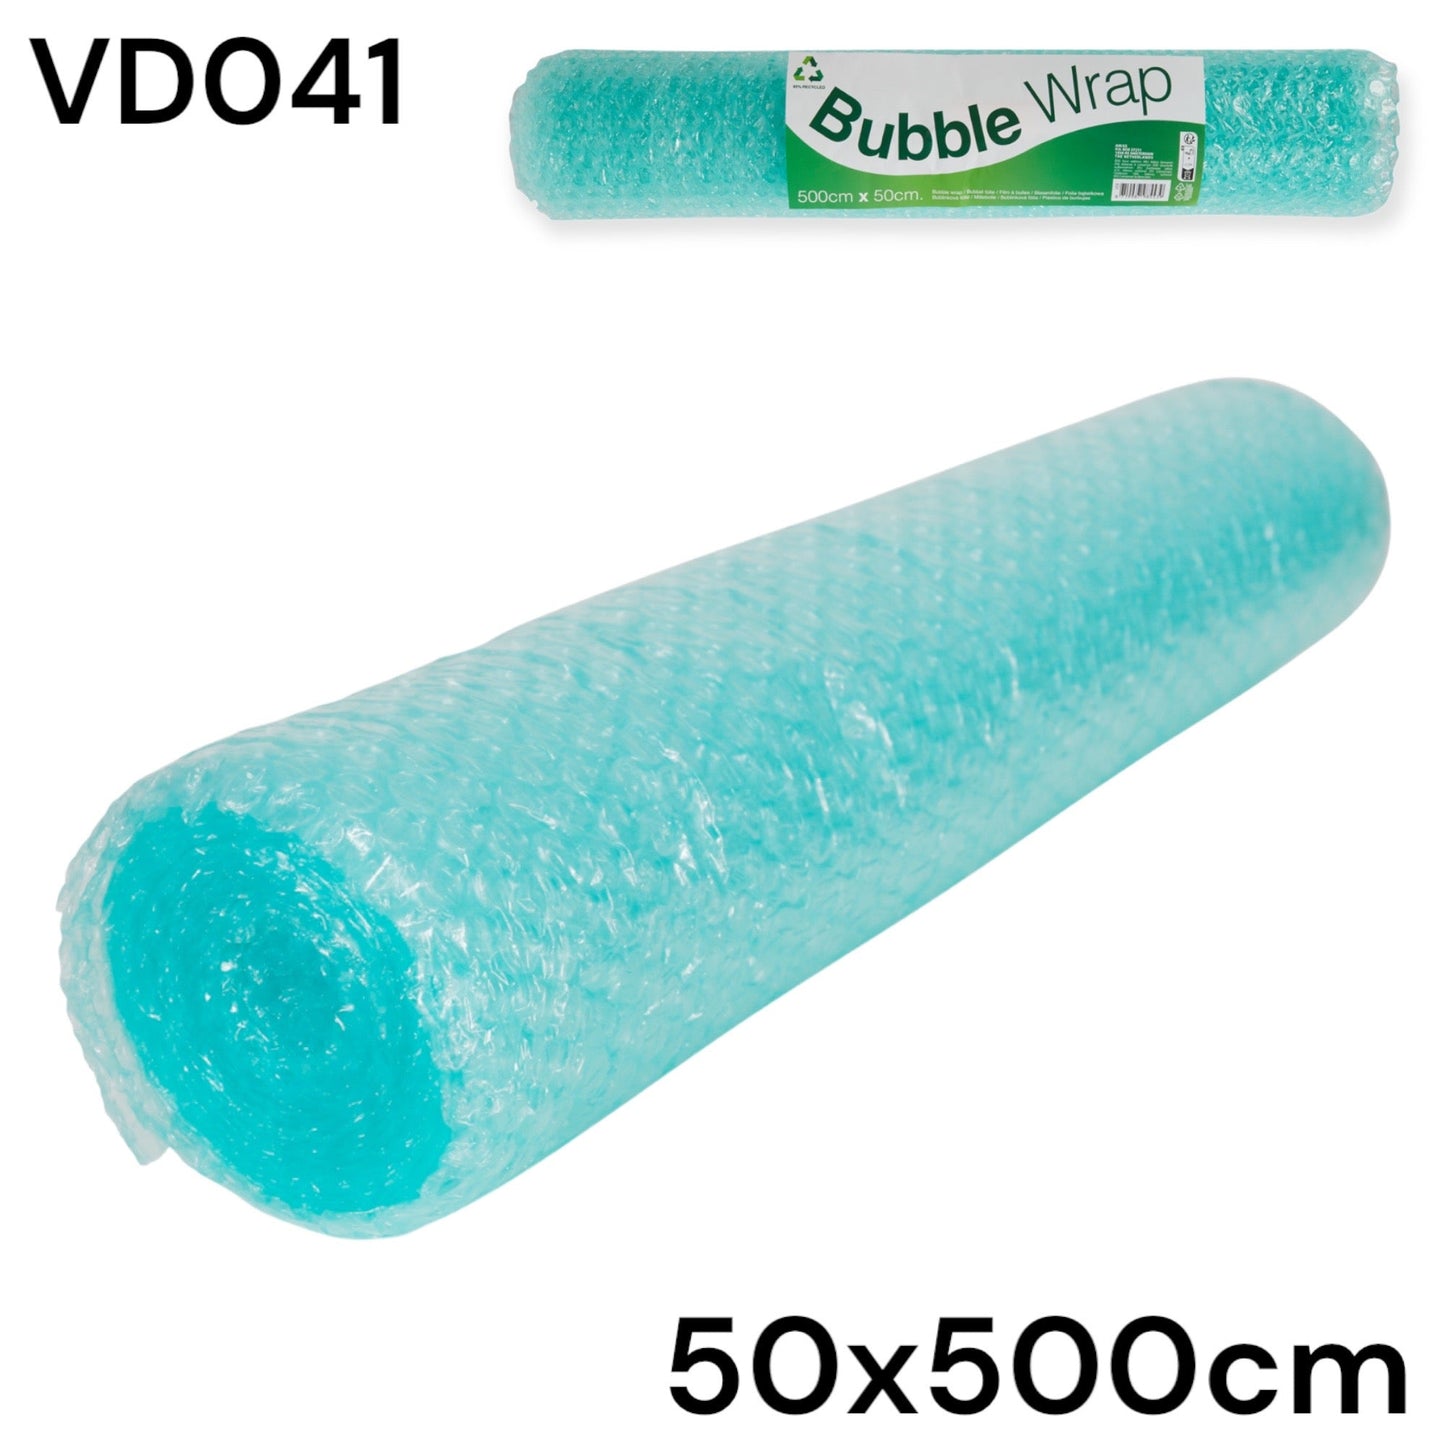 Timmy Toys - VD041 - Roll of Green Bubble Wrap Plastic - 50x500cm - 1 Piece